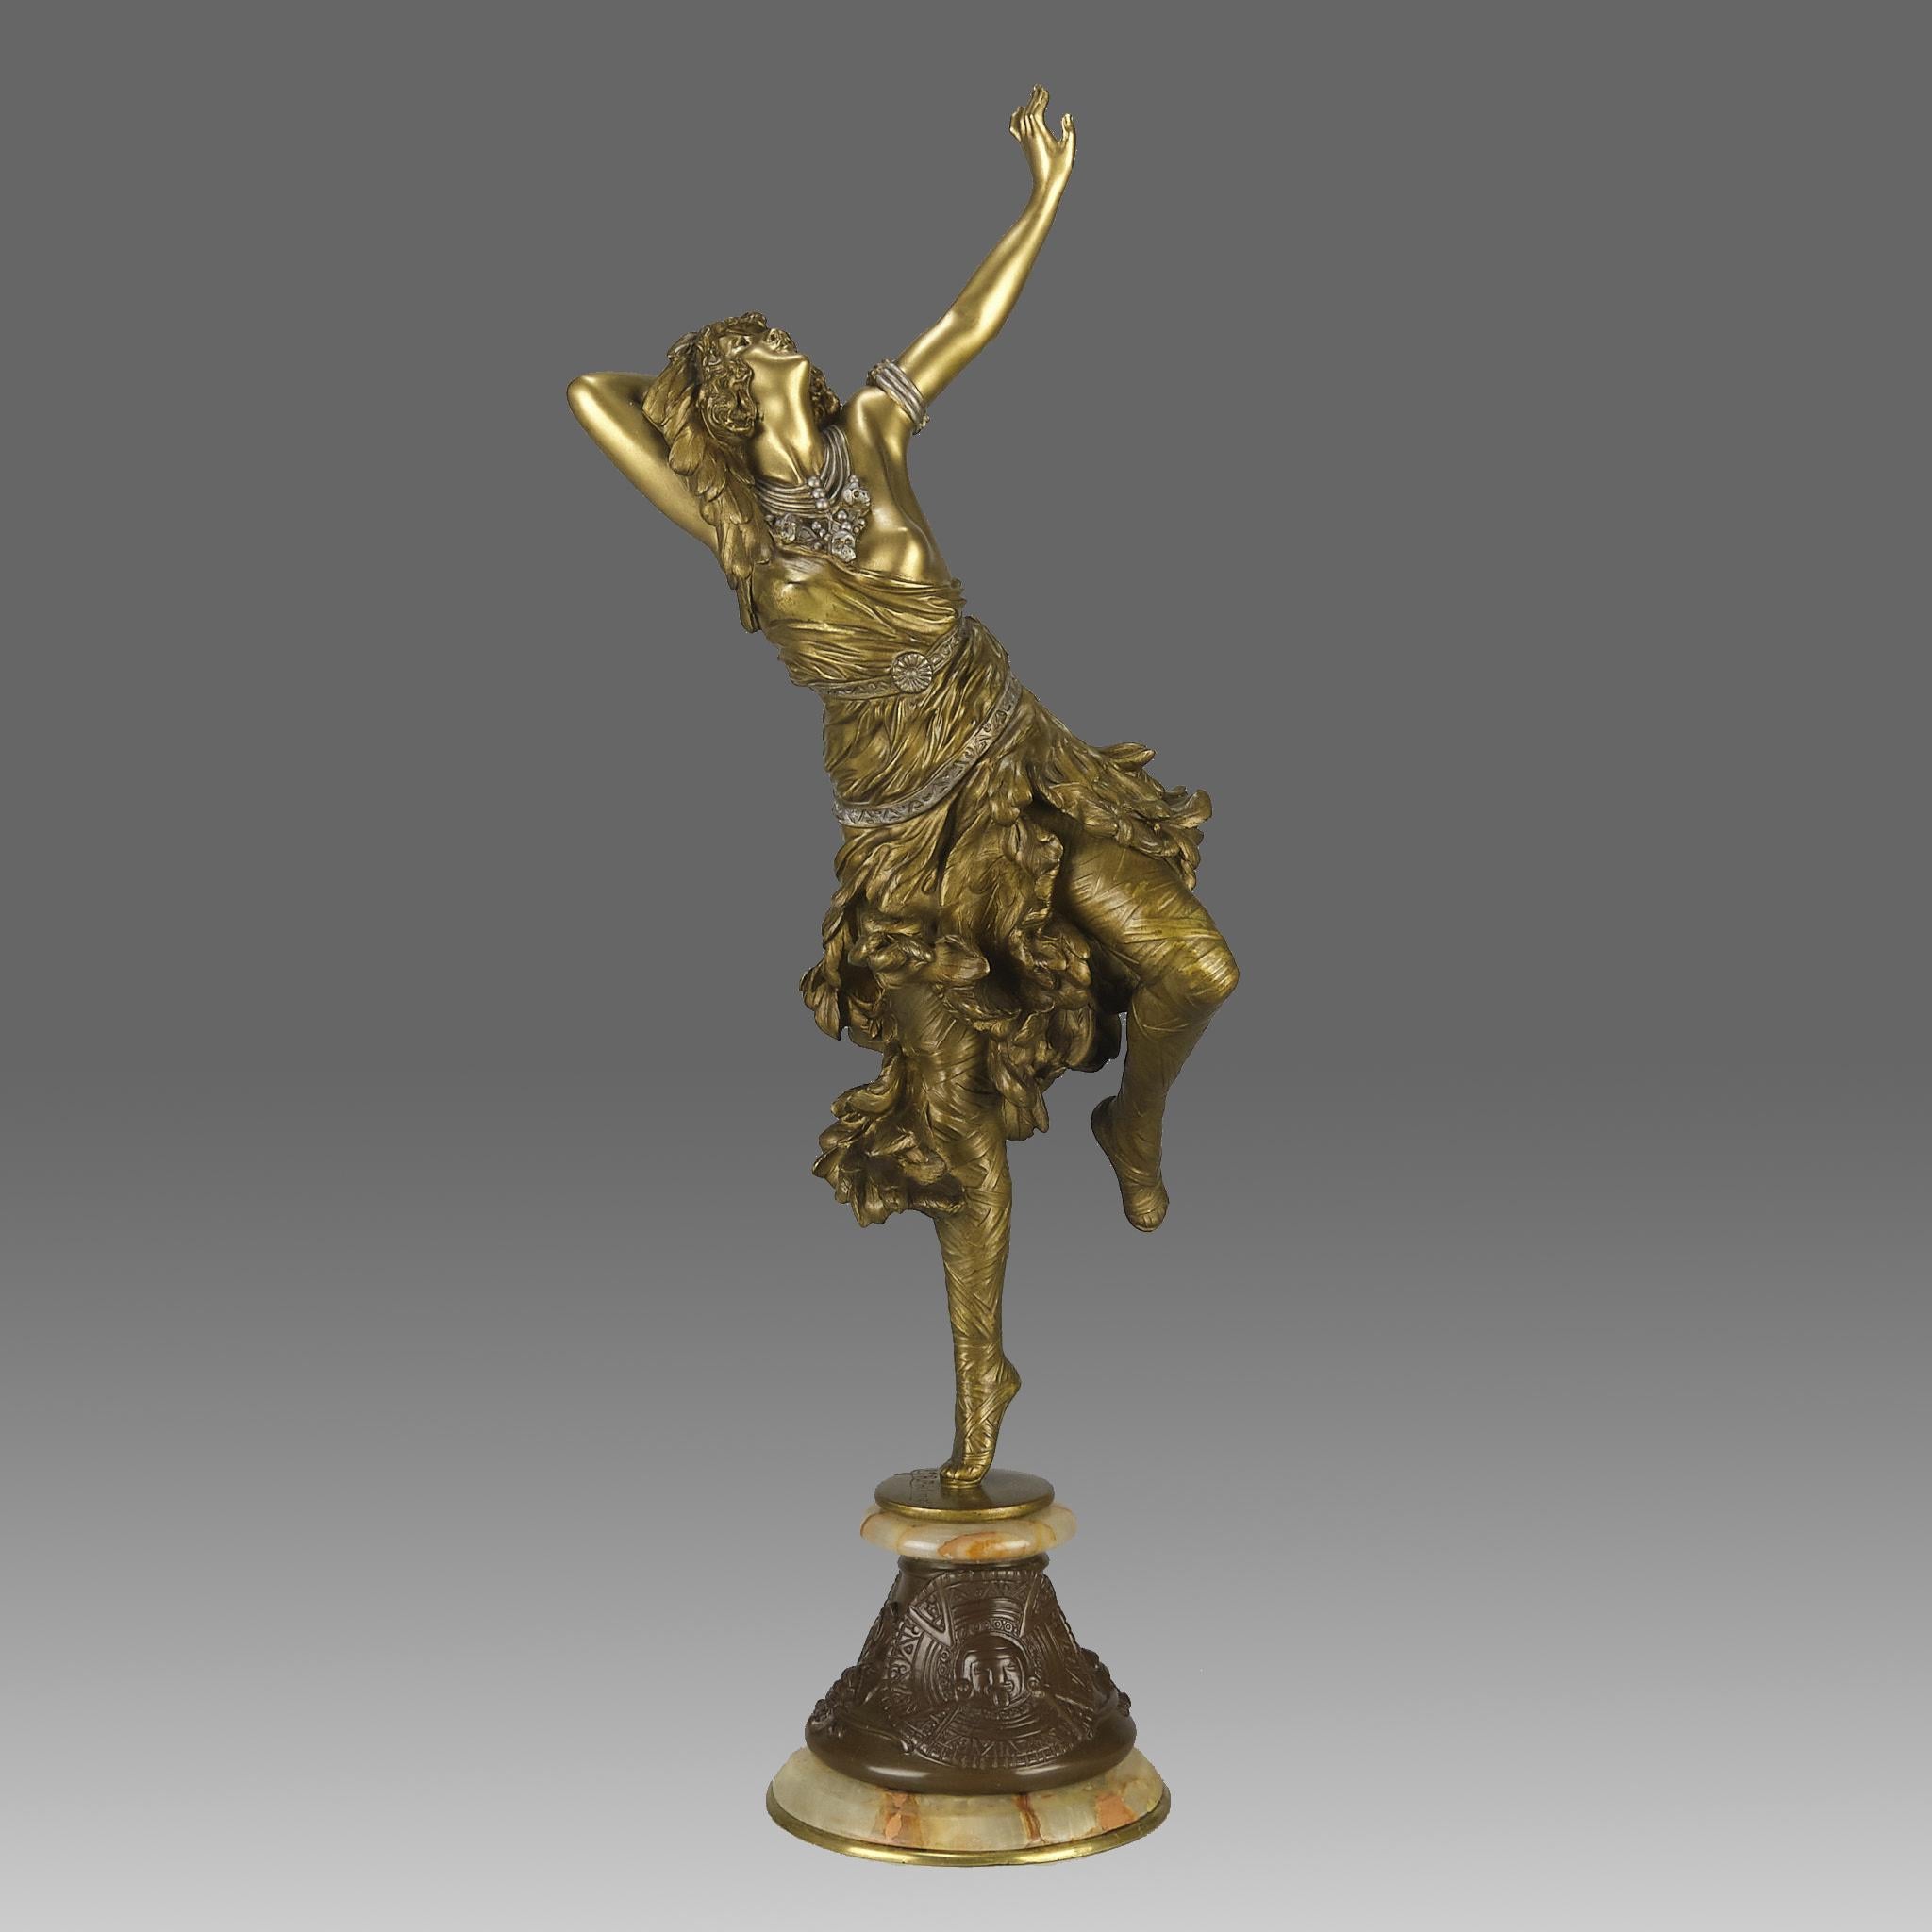 An exquisite early 20th Century French Art Deco gilt bronze figure of a beautiful Oriental dancer wearing a loosely fitted dress balanced on one leg in a dancing pose. The bronze exhibiting excellent detail and colour, signed Cl.J.R.Colinet